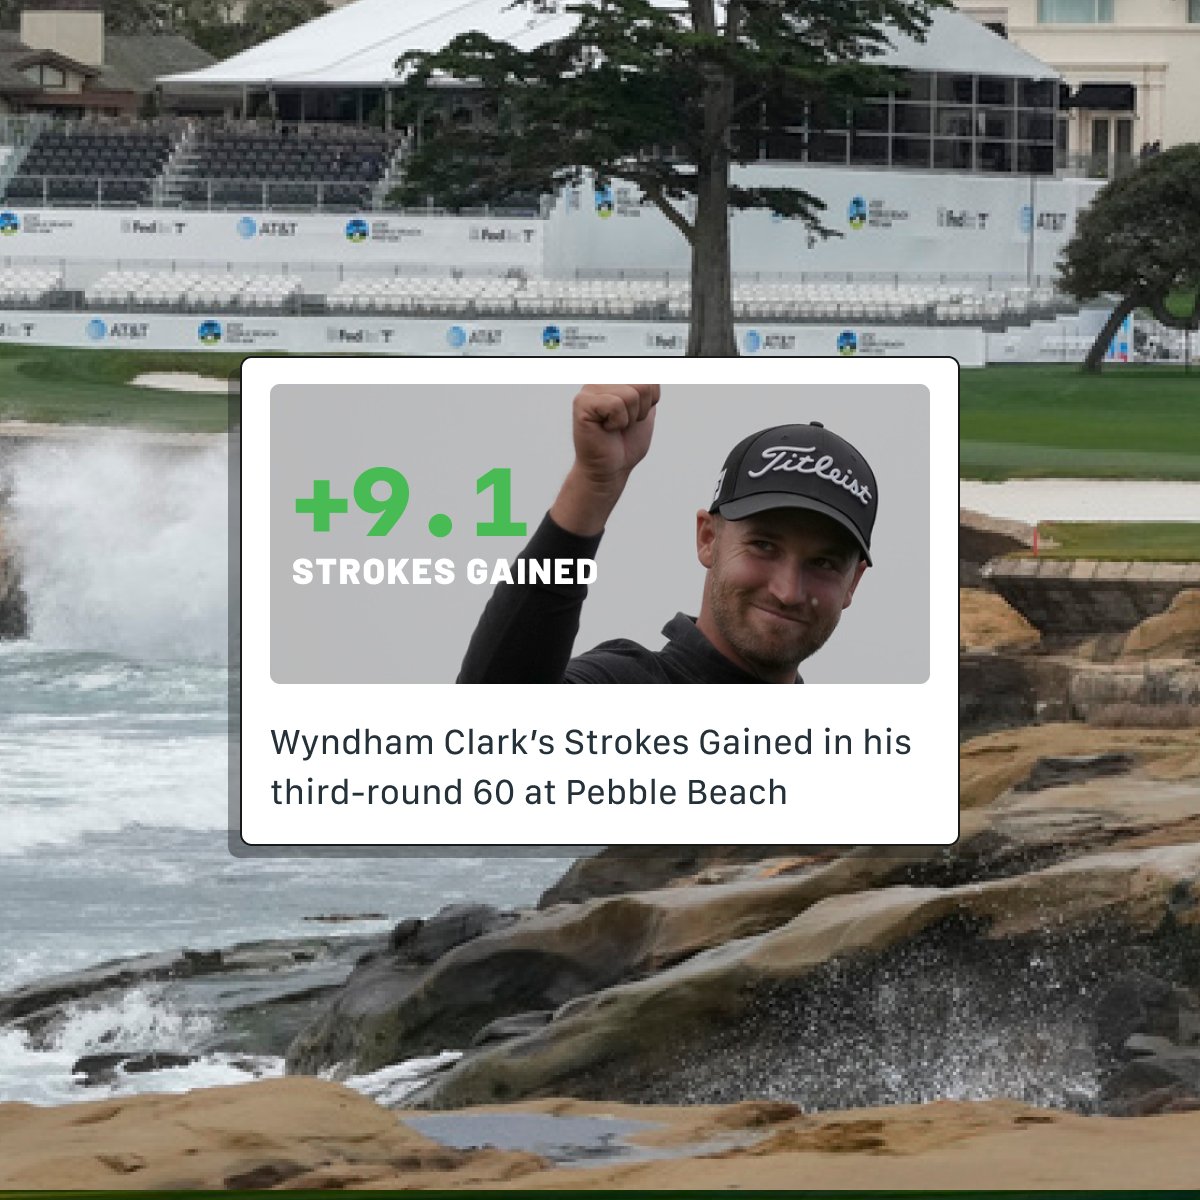 Professional golf saw two incredibly good rounds this weekend - one at LIV Mayakoba and one at the AT&T Pebble Beach Pro-Am - with each putting up Strokes Gained statistics that would be solid for an entire event, much less one round. On Friday, Joaquin Niemann fired a 12-under…